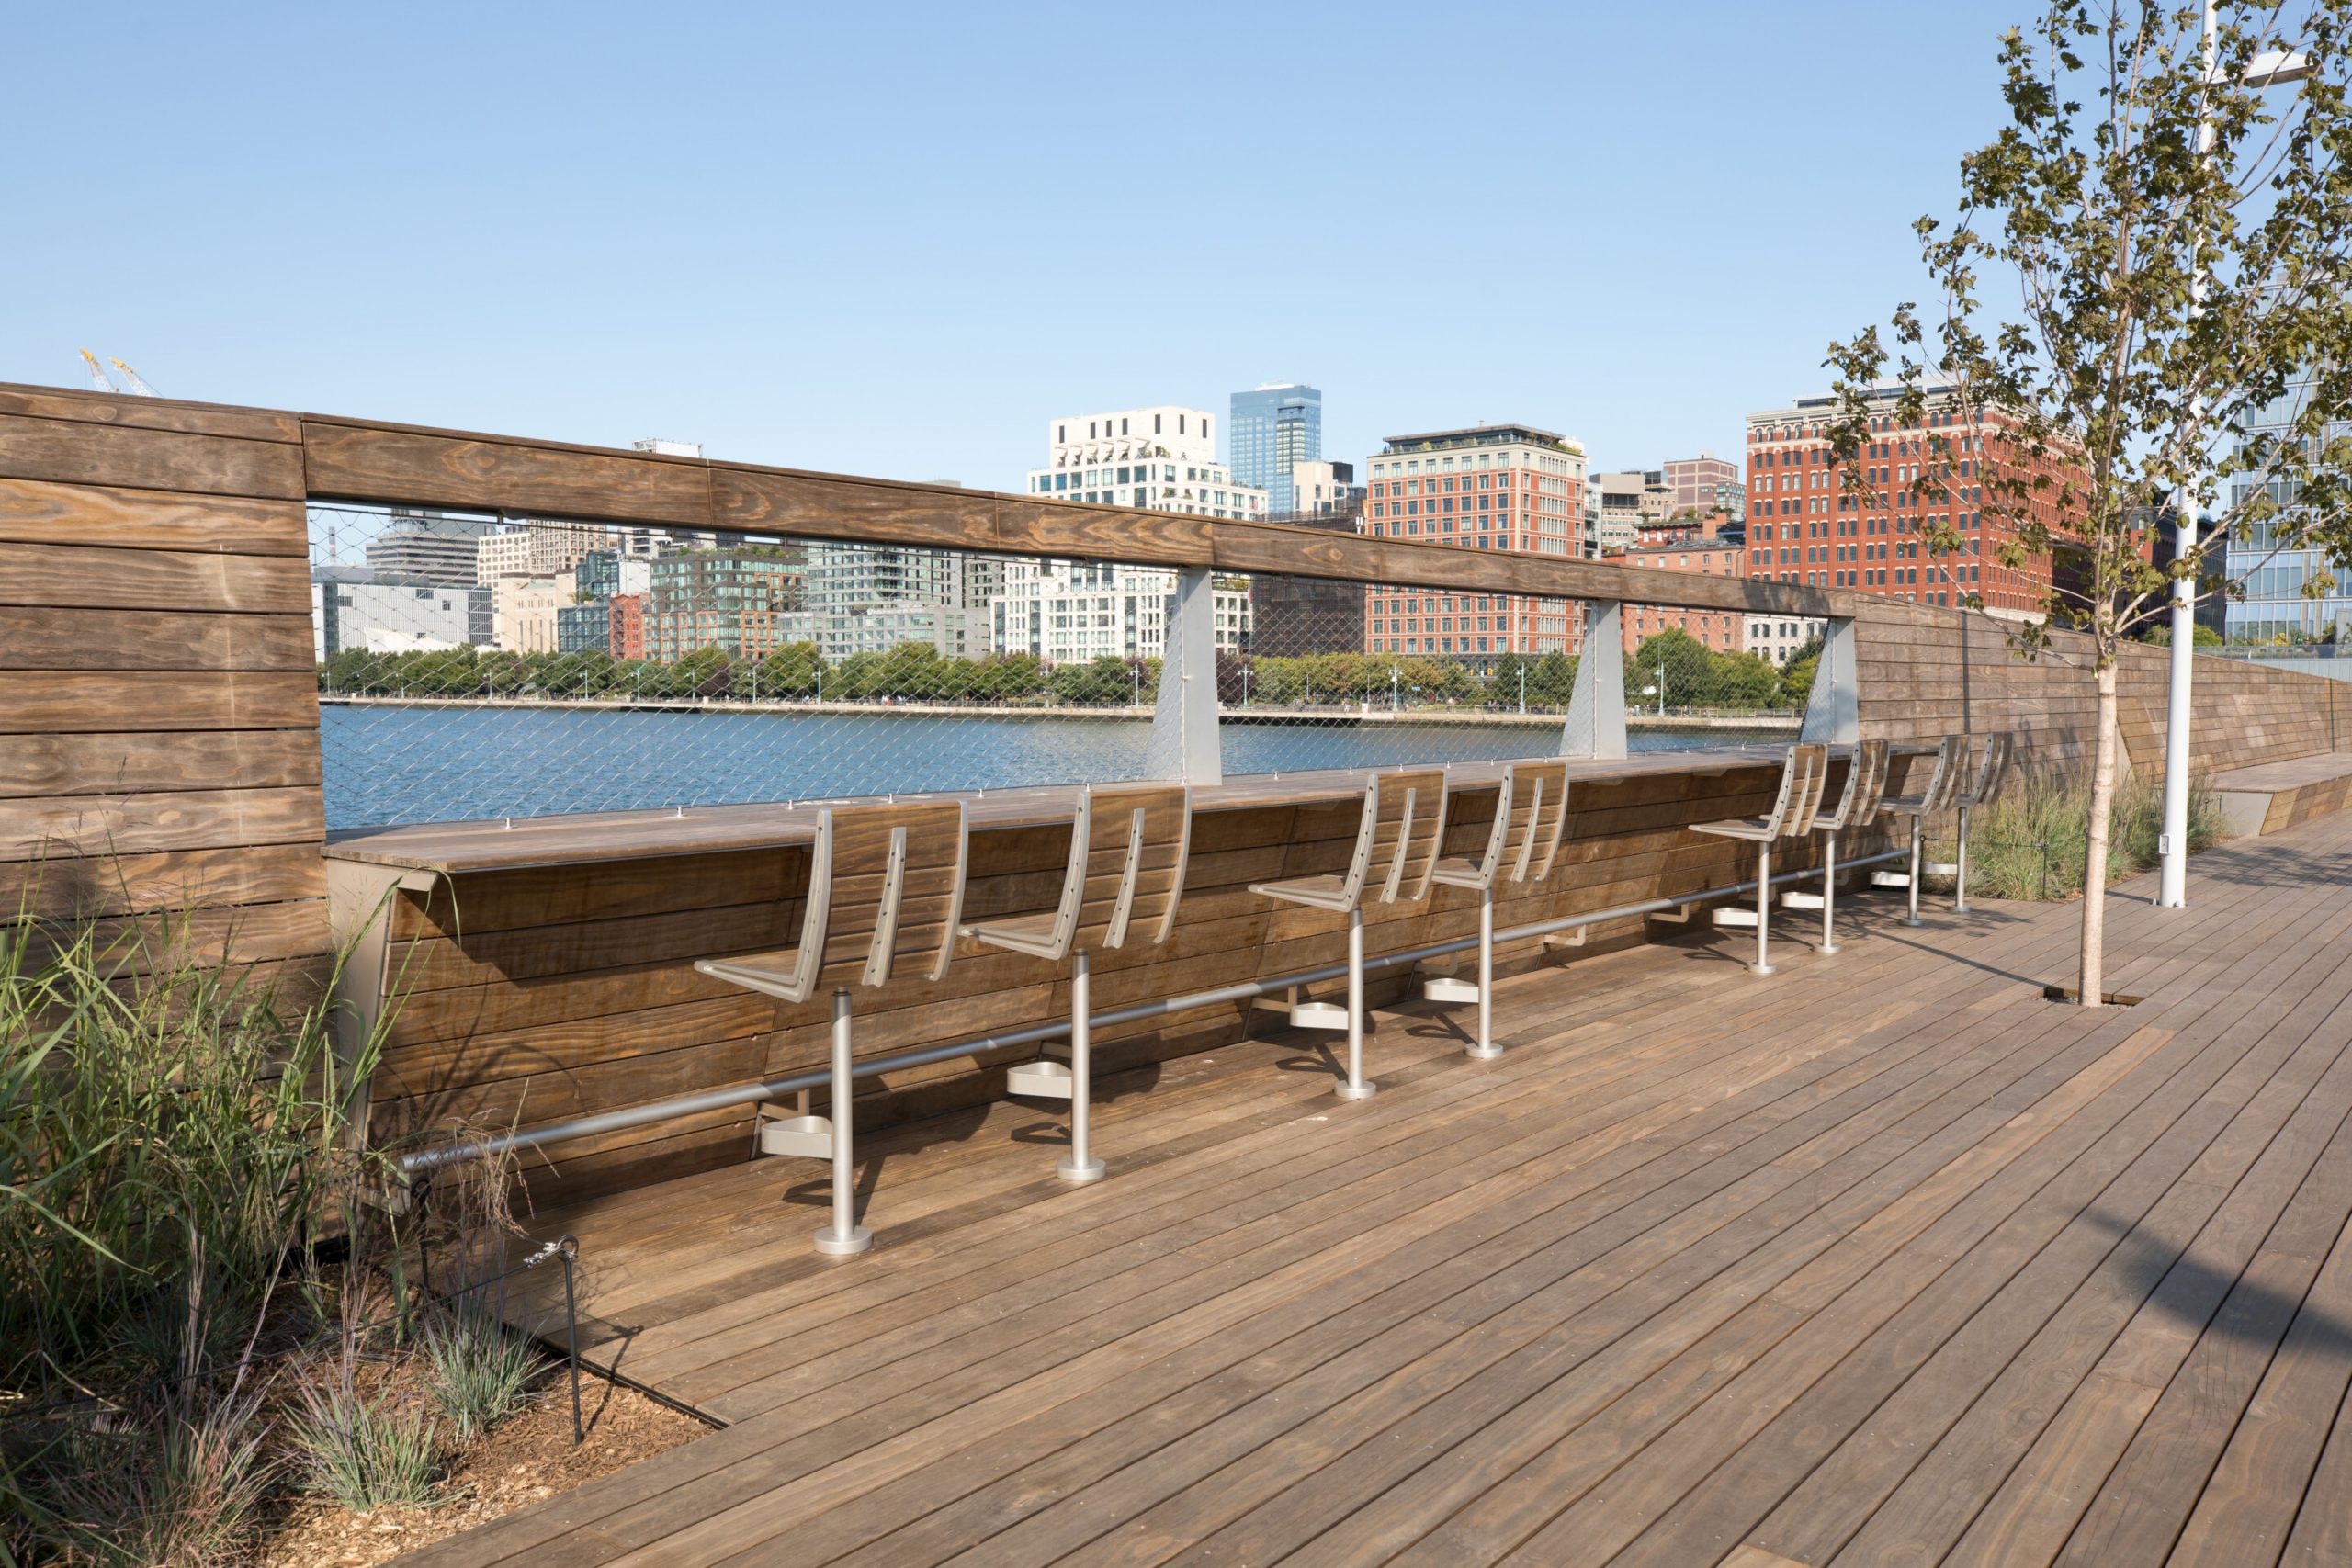 Pier 26 in Manhatten with seating area in waterfront.